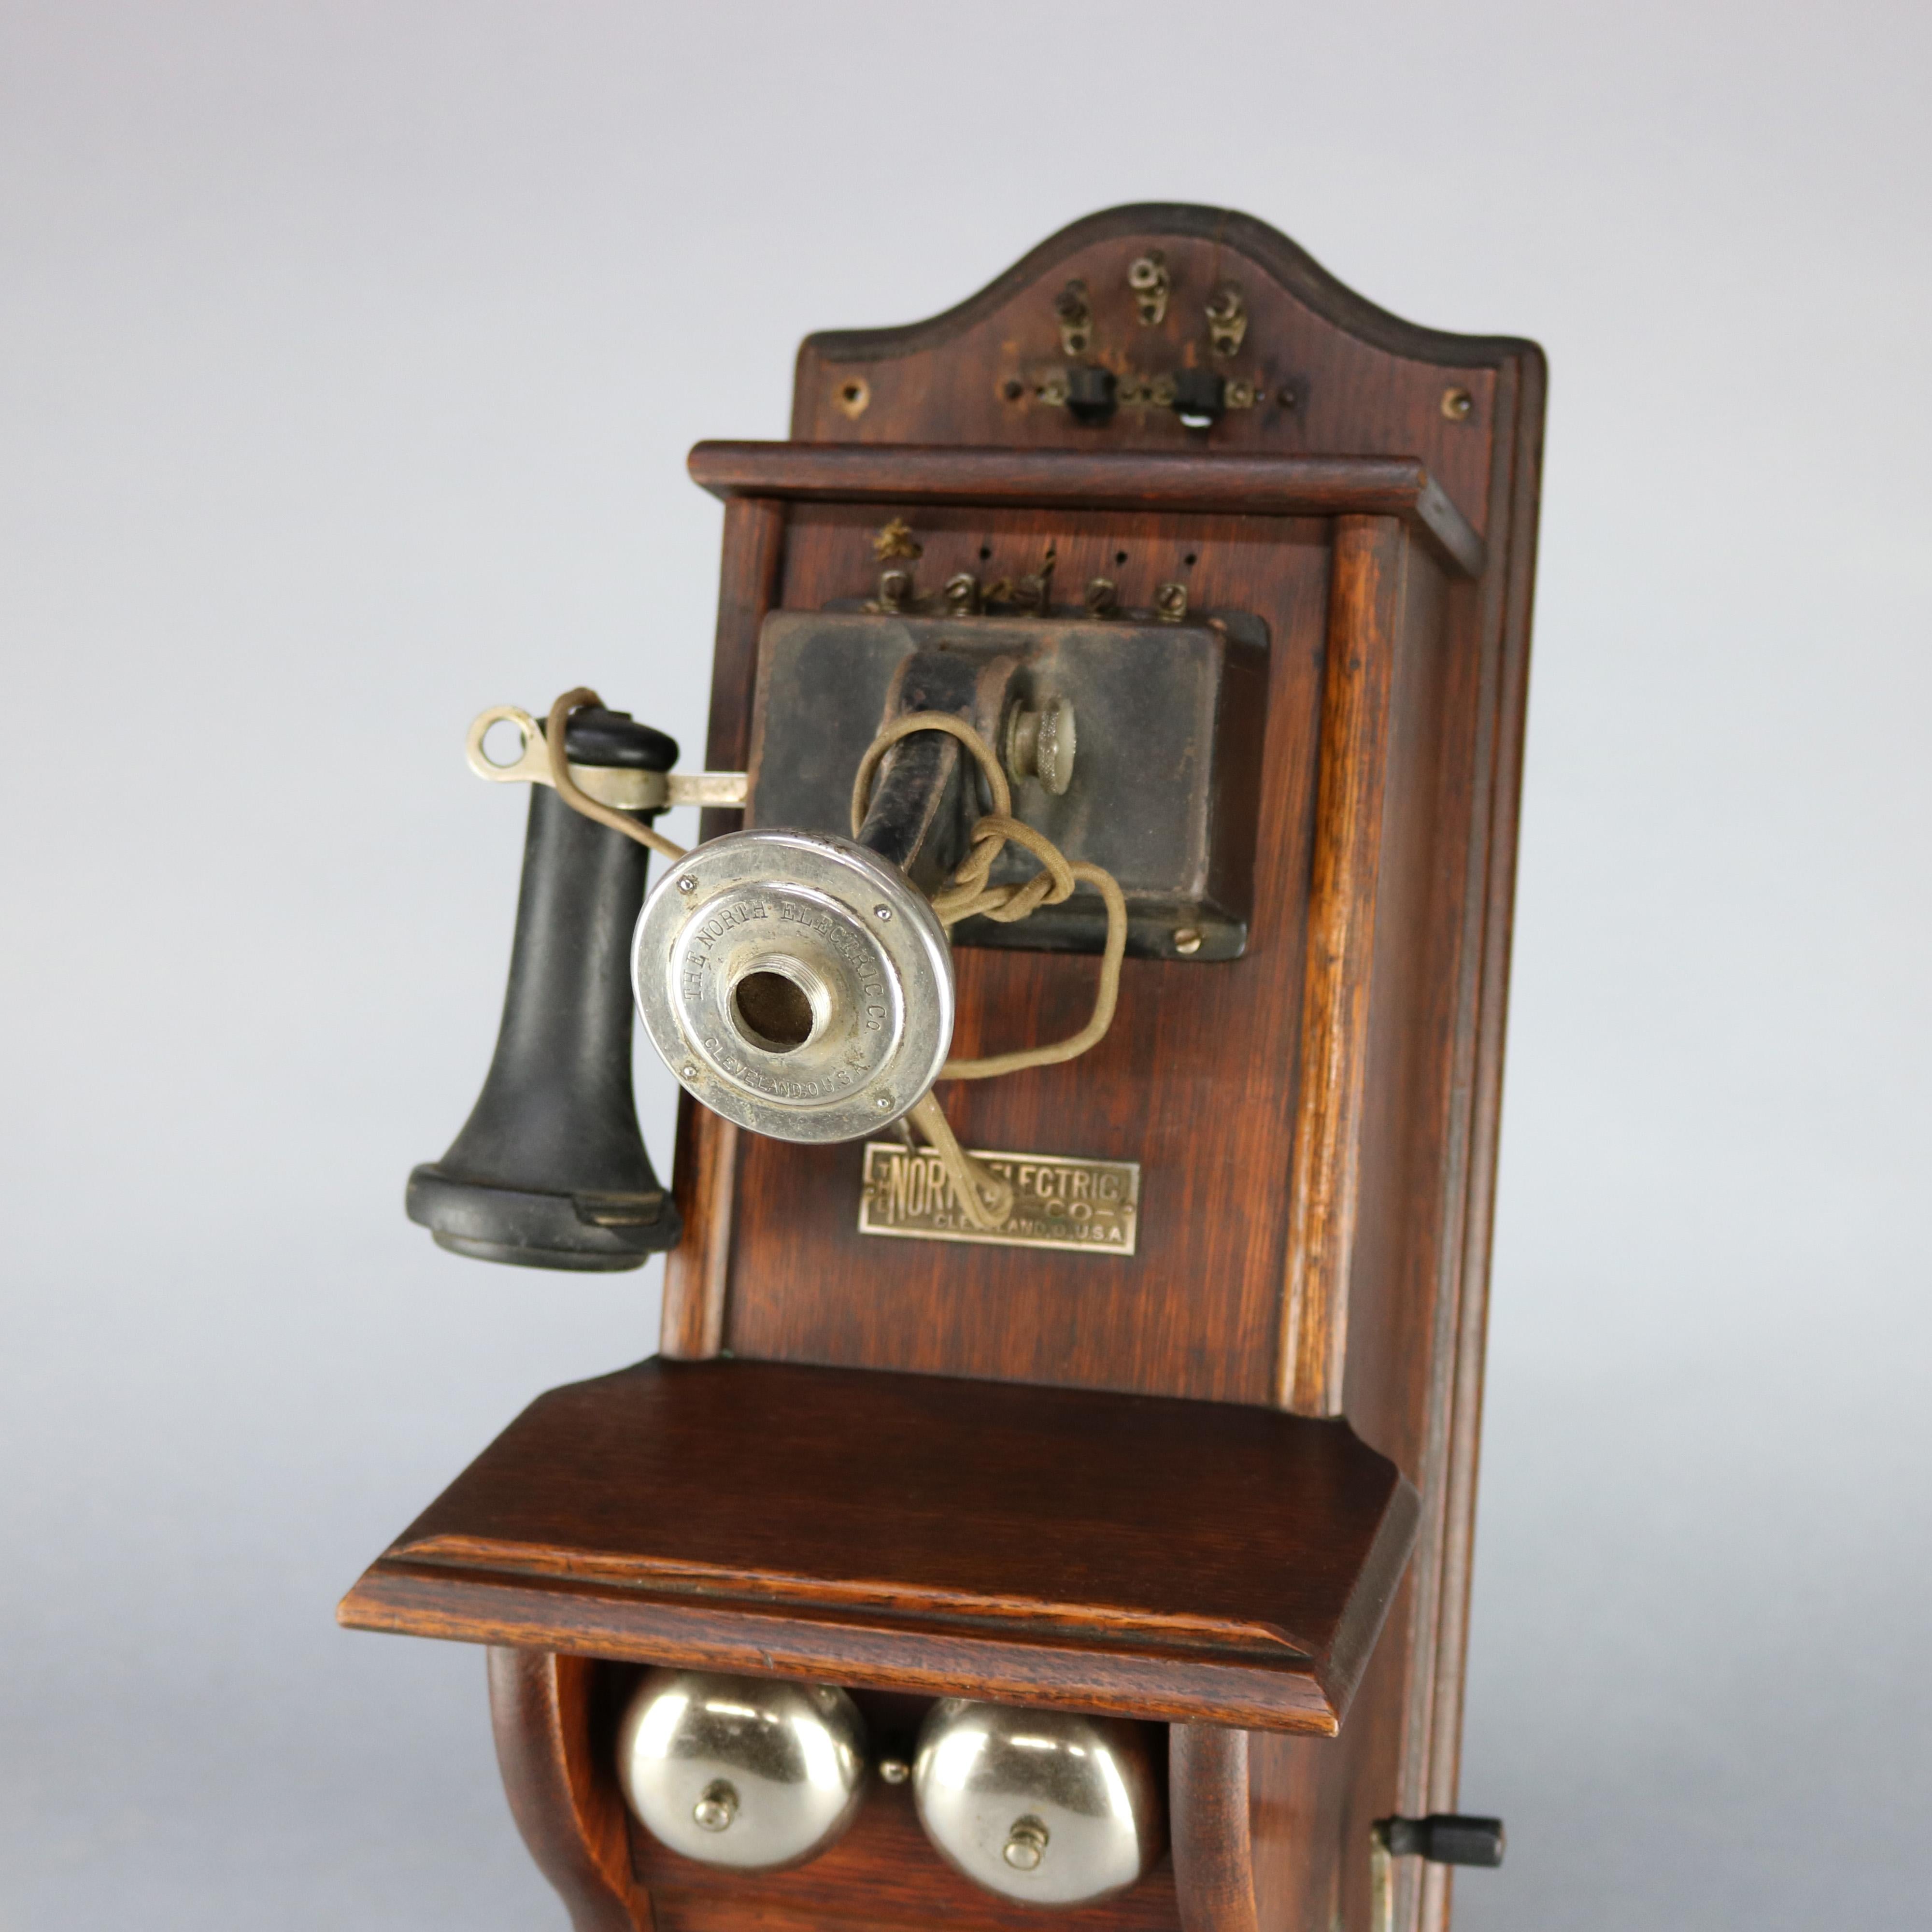 An antique paddle type wall telephone by North Electric offers oak case with original hardware and label as photographed, circa 1890.

Measures: 25